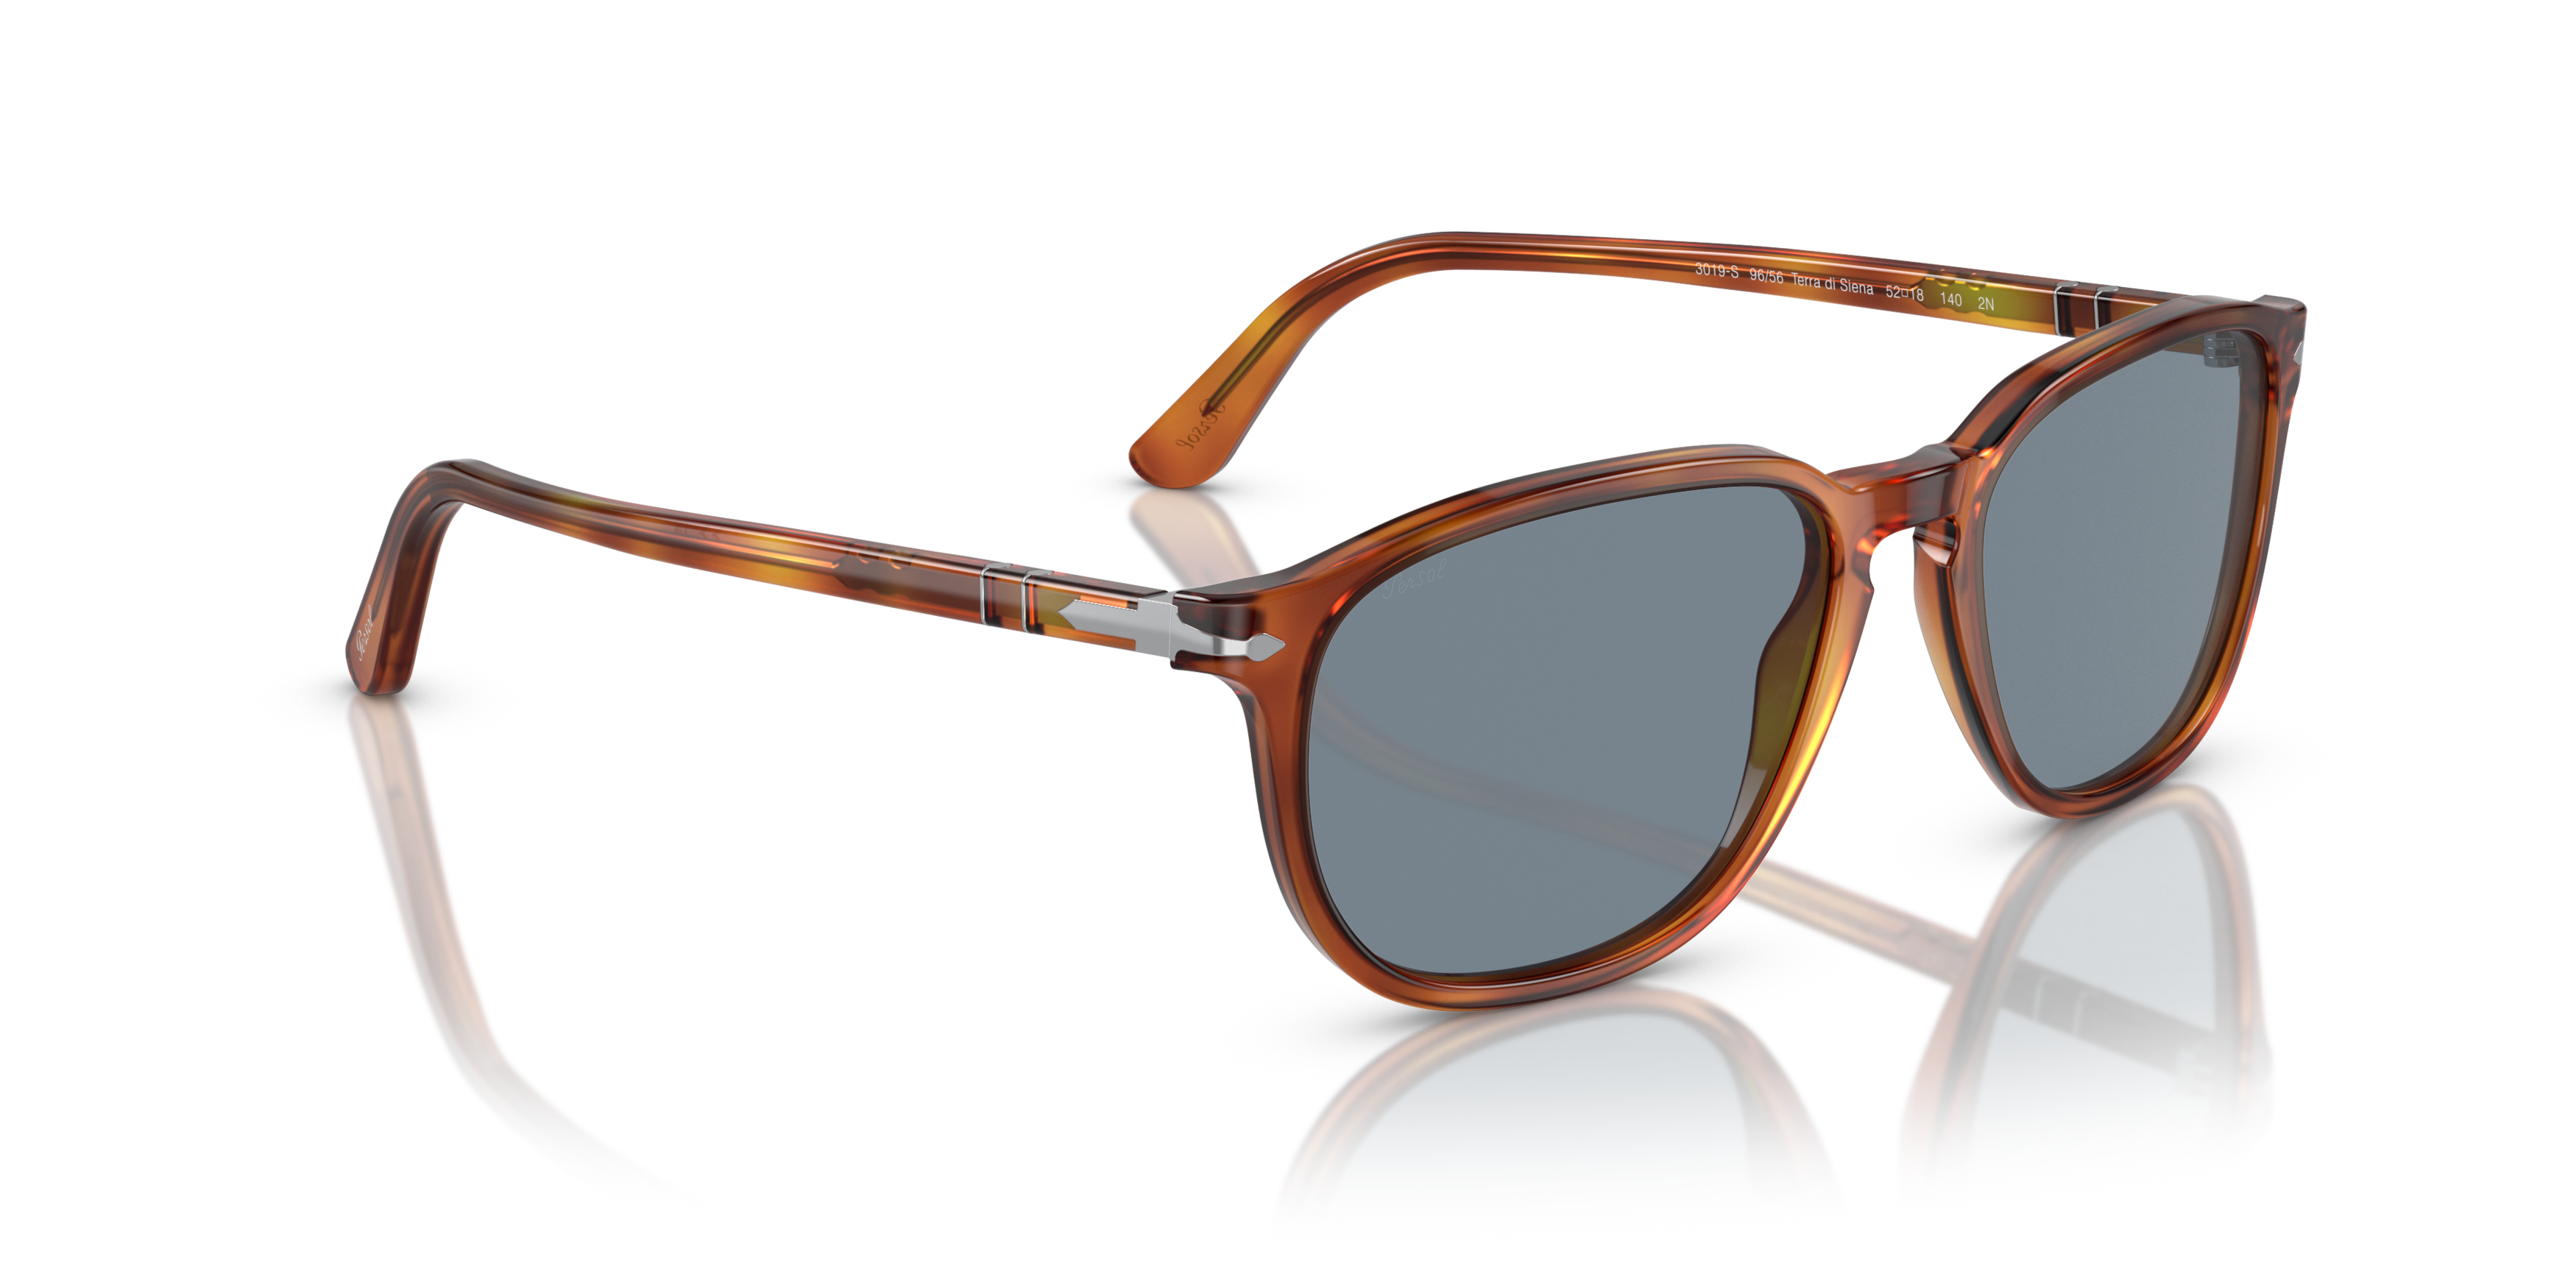 [products.image.angle_right01] Persol 0PO3019S 96/56